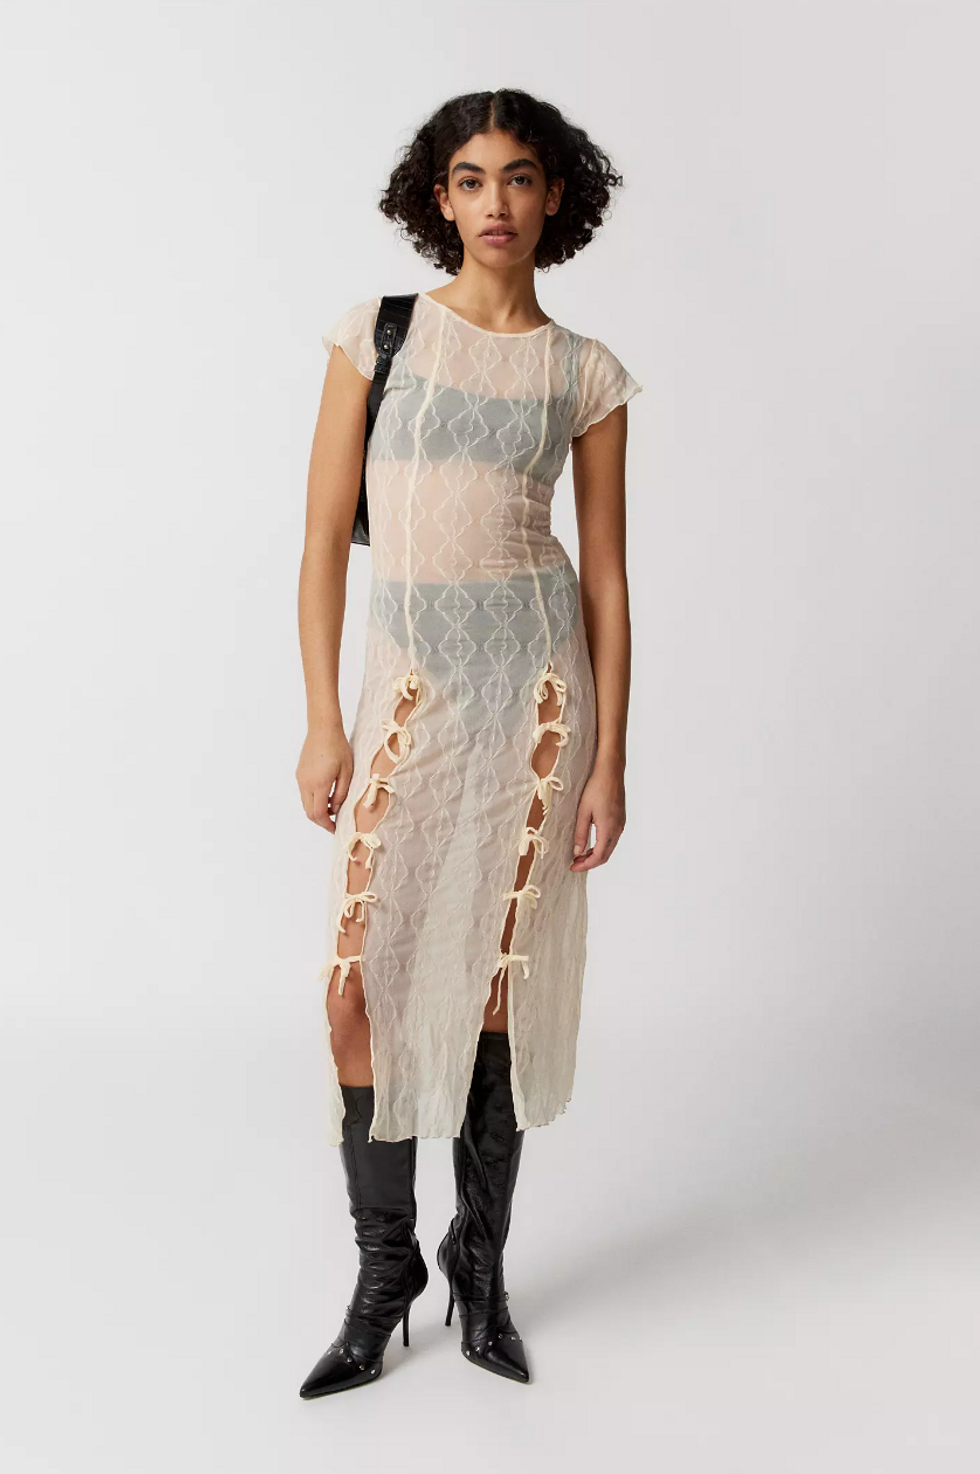 Find Me Now Second Skin Sheer Midi Dress